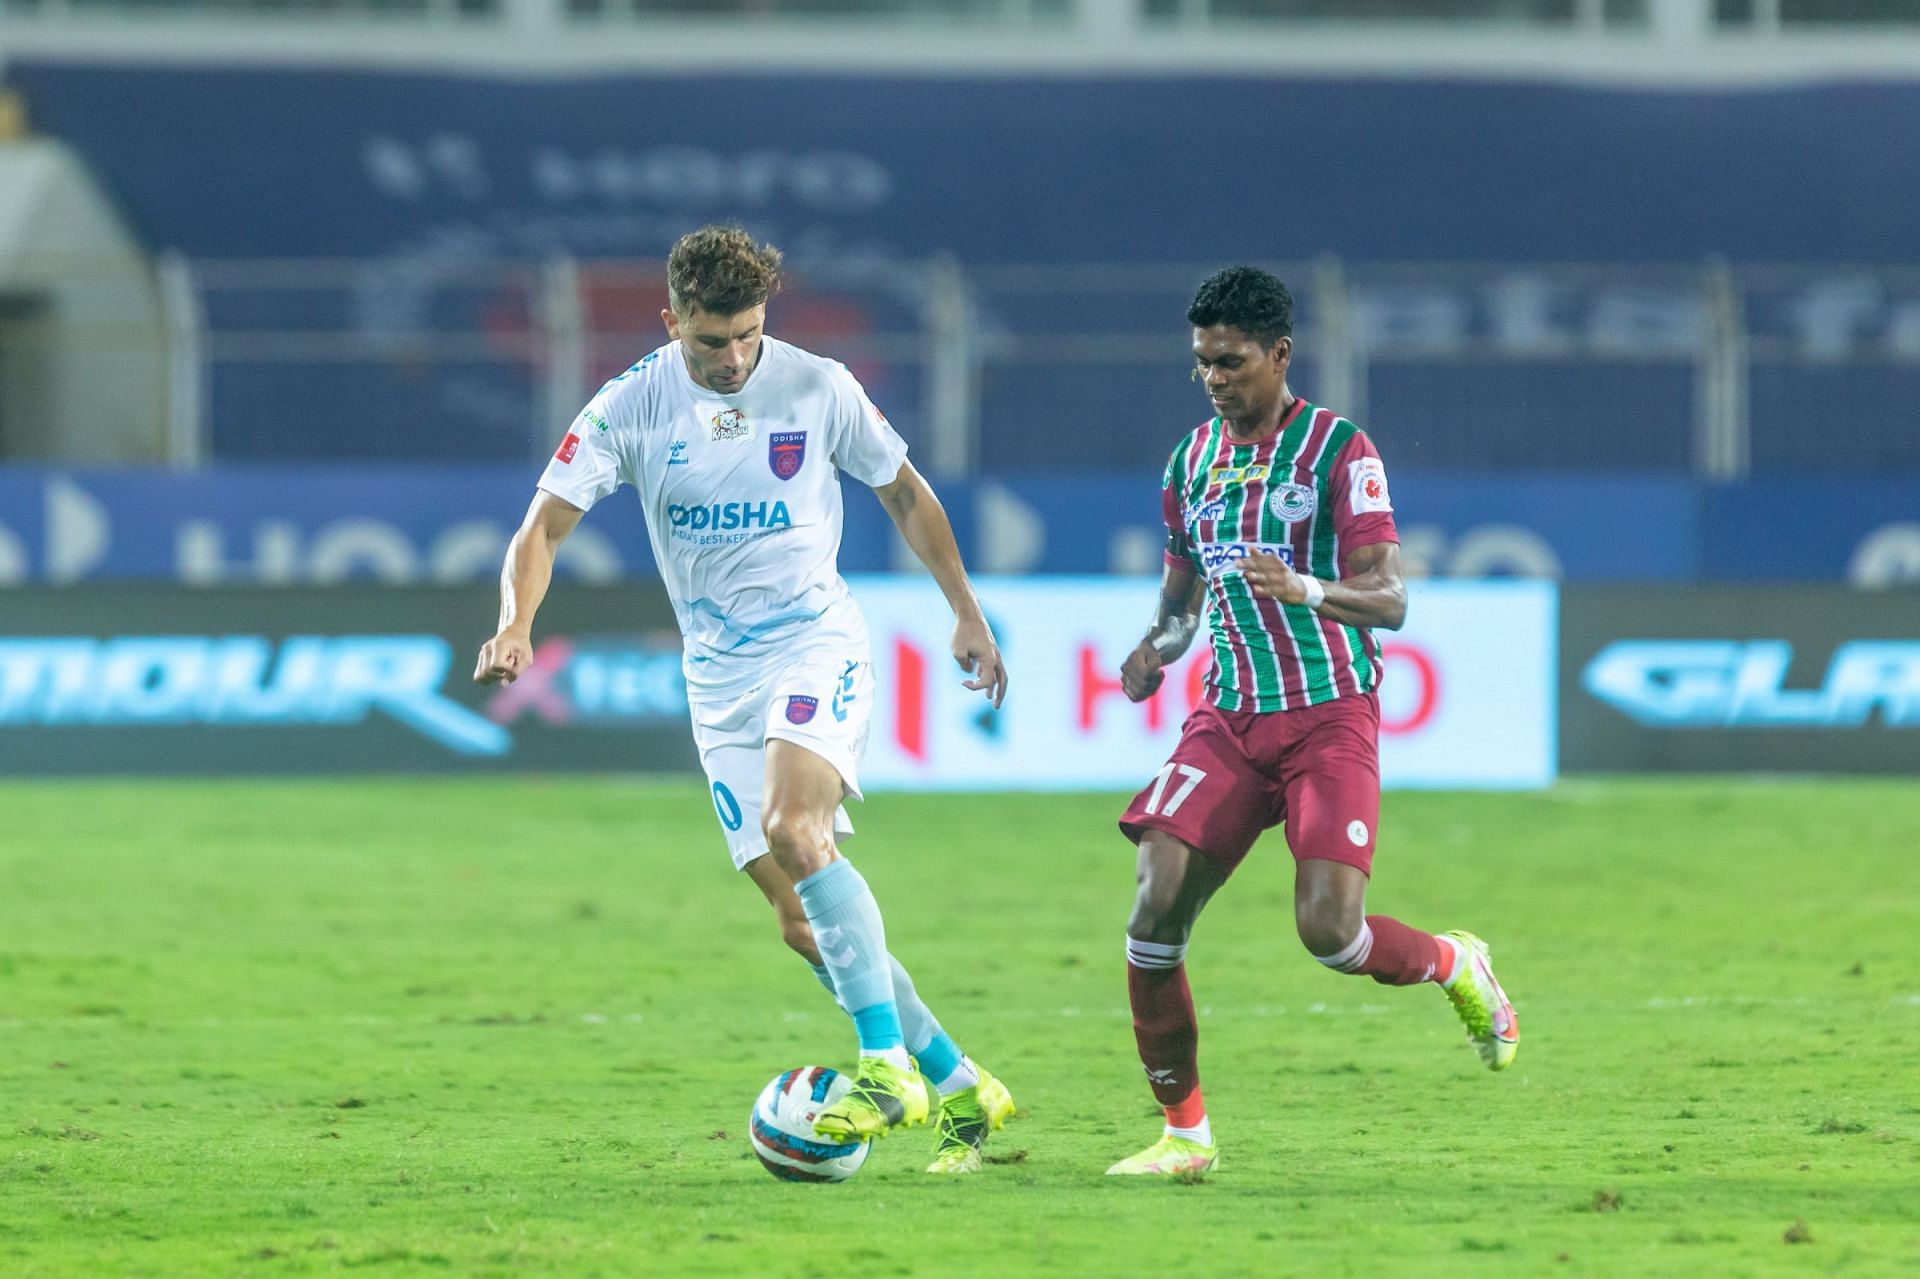 Odisha FC&#039;s Javier Hernandez vying for the ball against ATK Mohun Bagan&#039;s Liston Colaco (Image Courtesy: ISL)